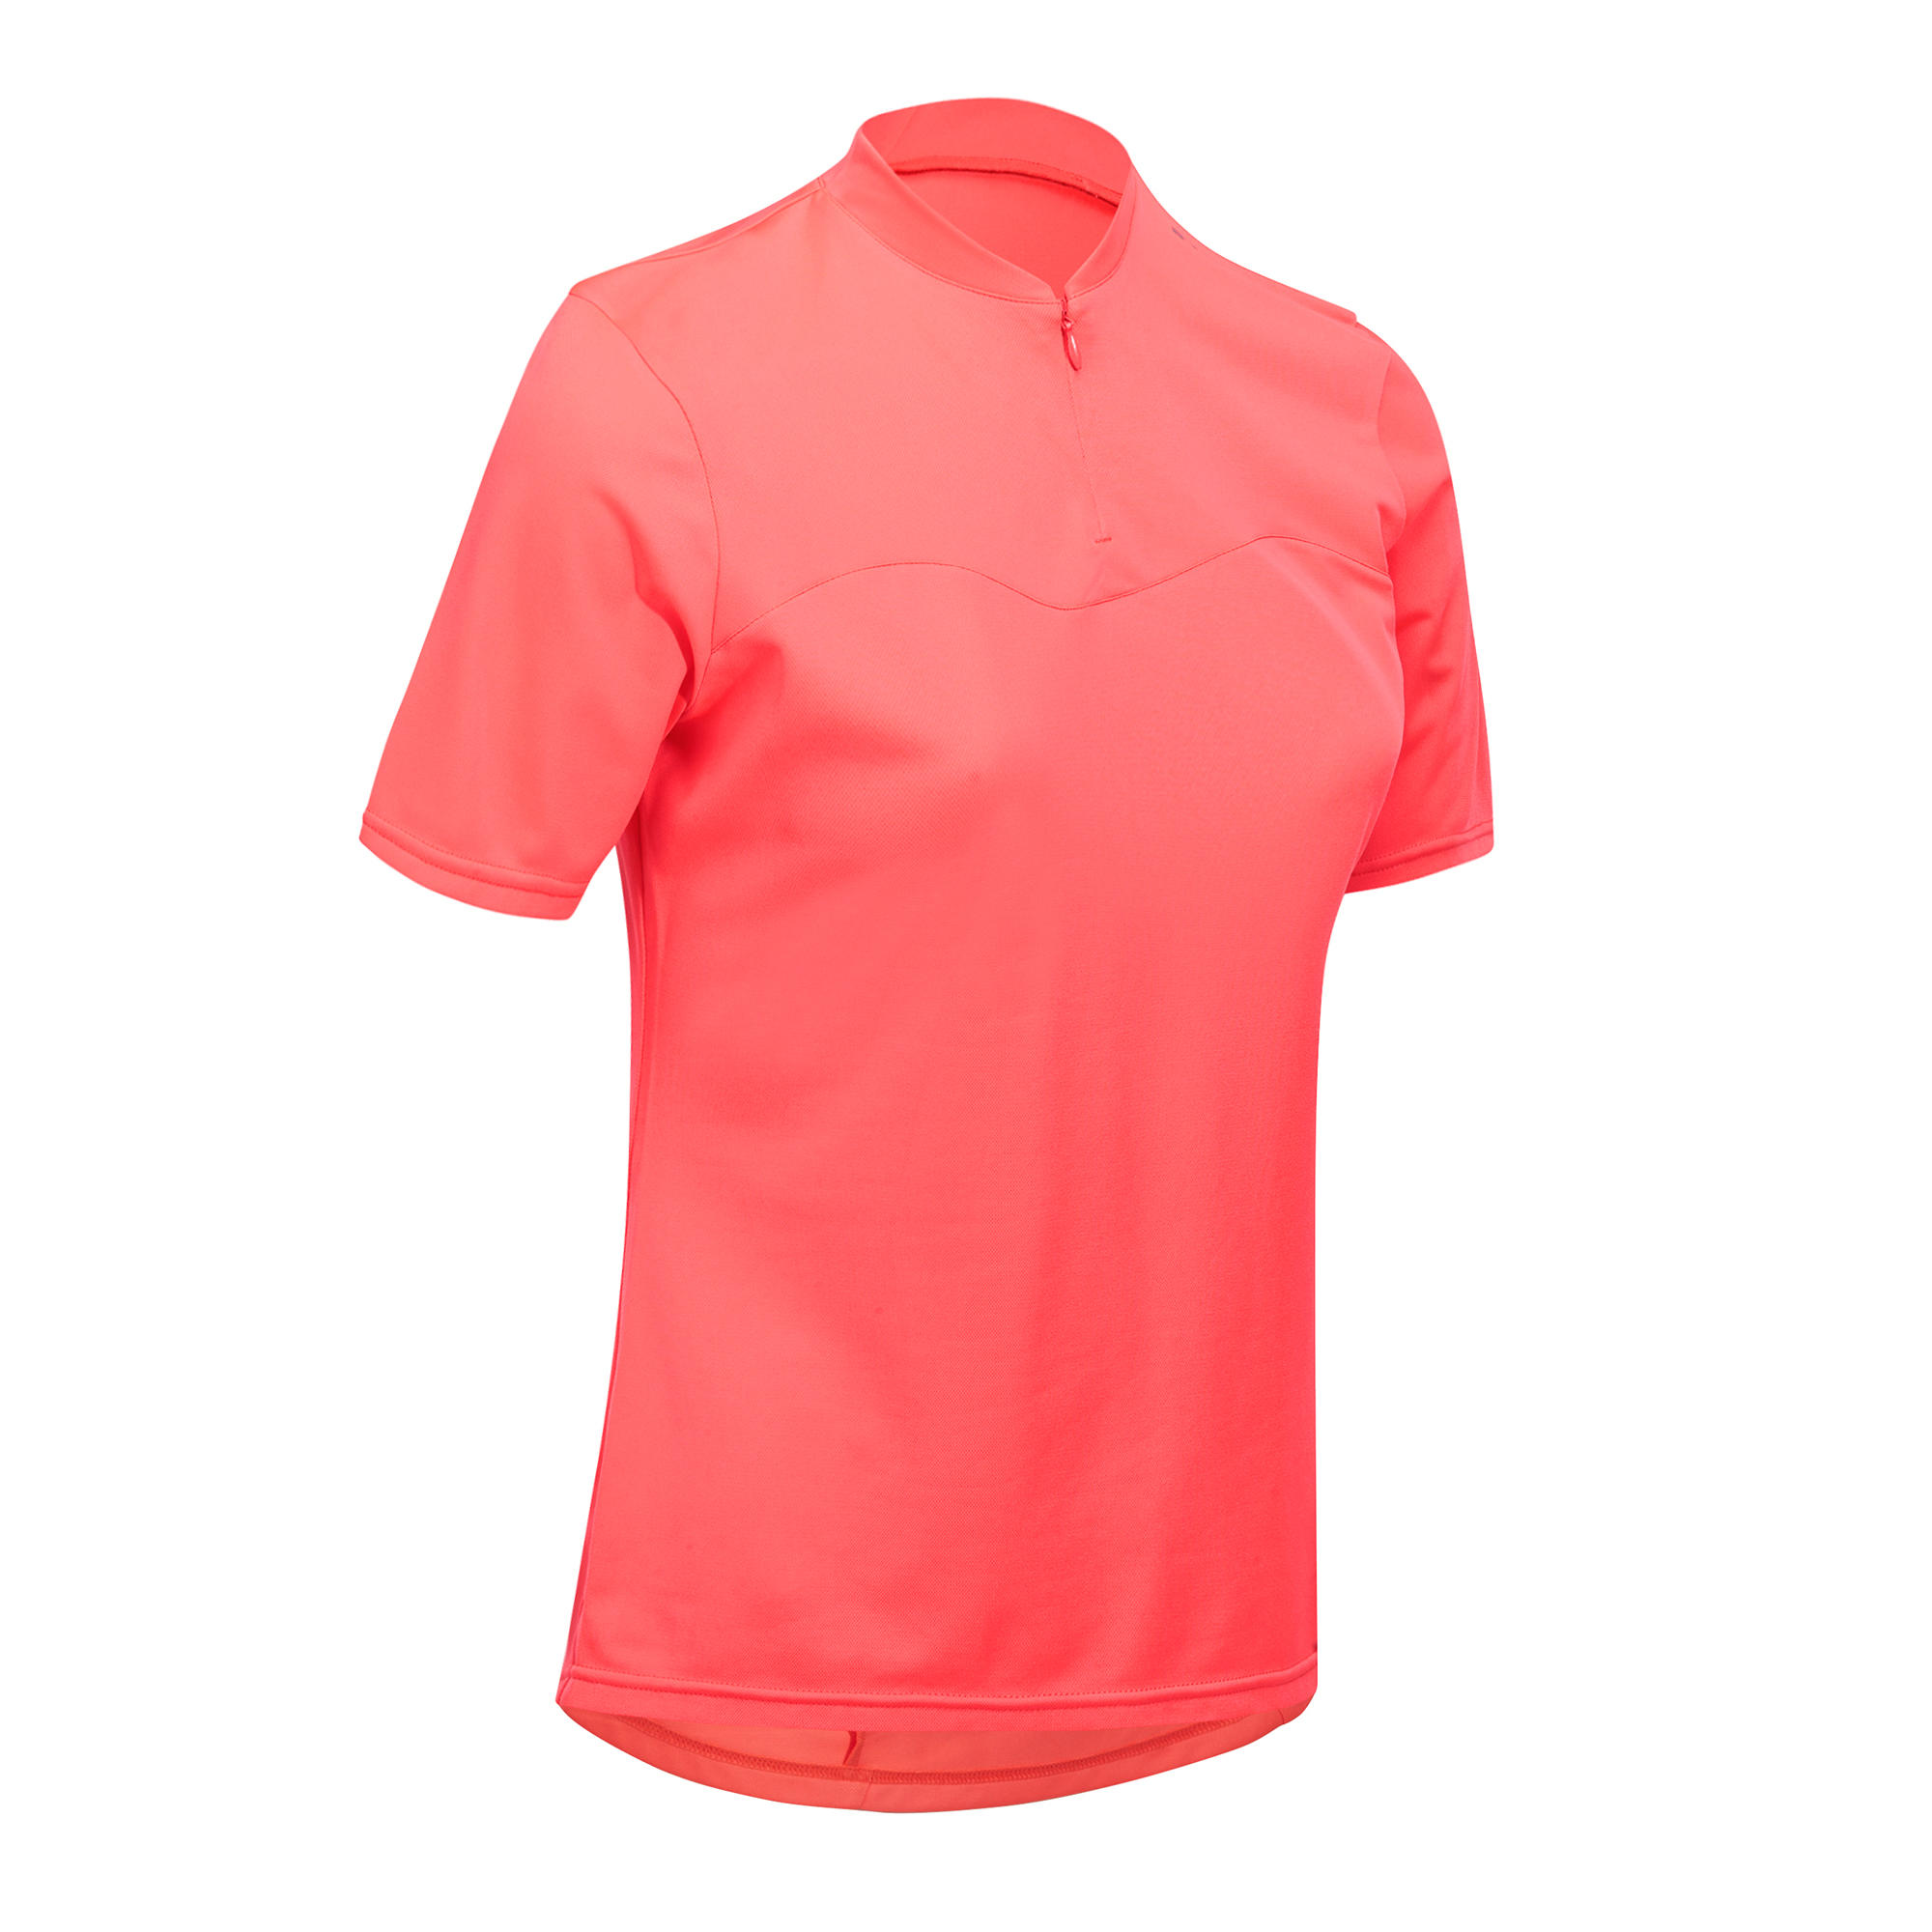 TRIBAN 100 Women's Short-Sleeved Cycling Jersey - Pink